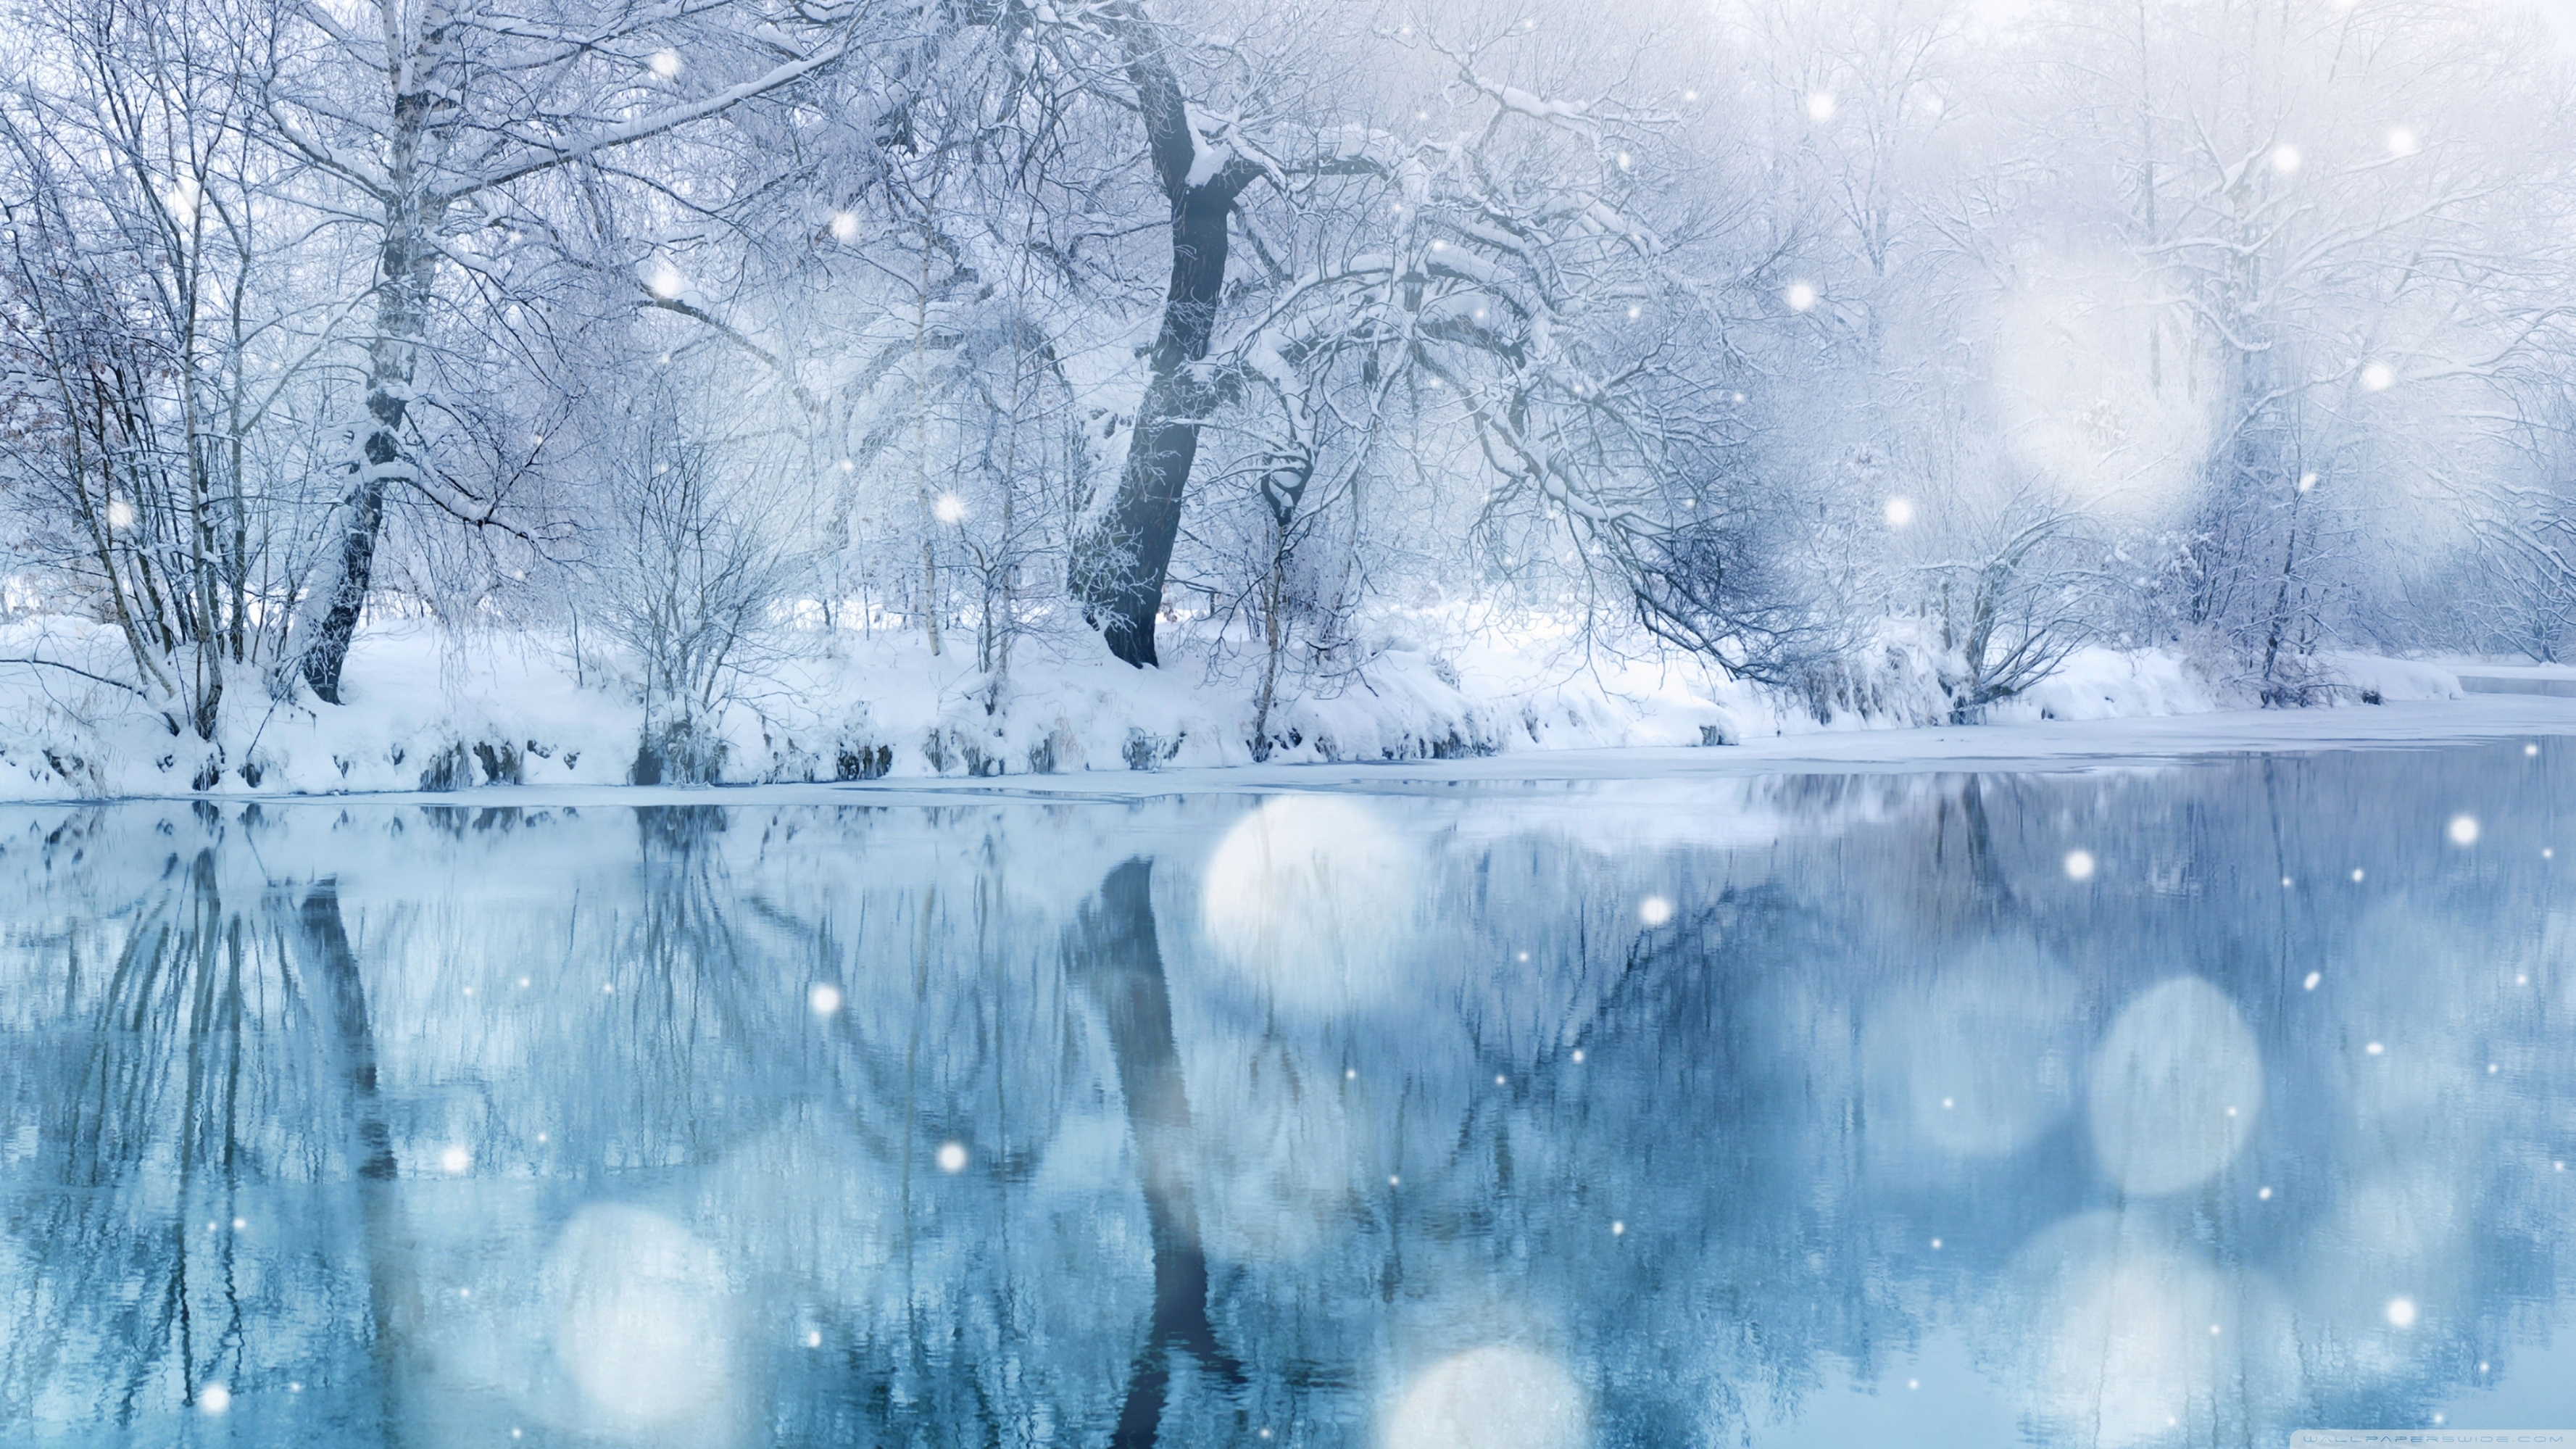 10 Latest Winter Snow Wallpaper Hd FULL HD 1920×1080 For PC Background